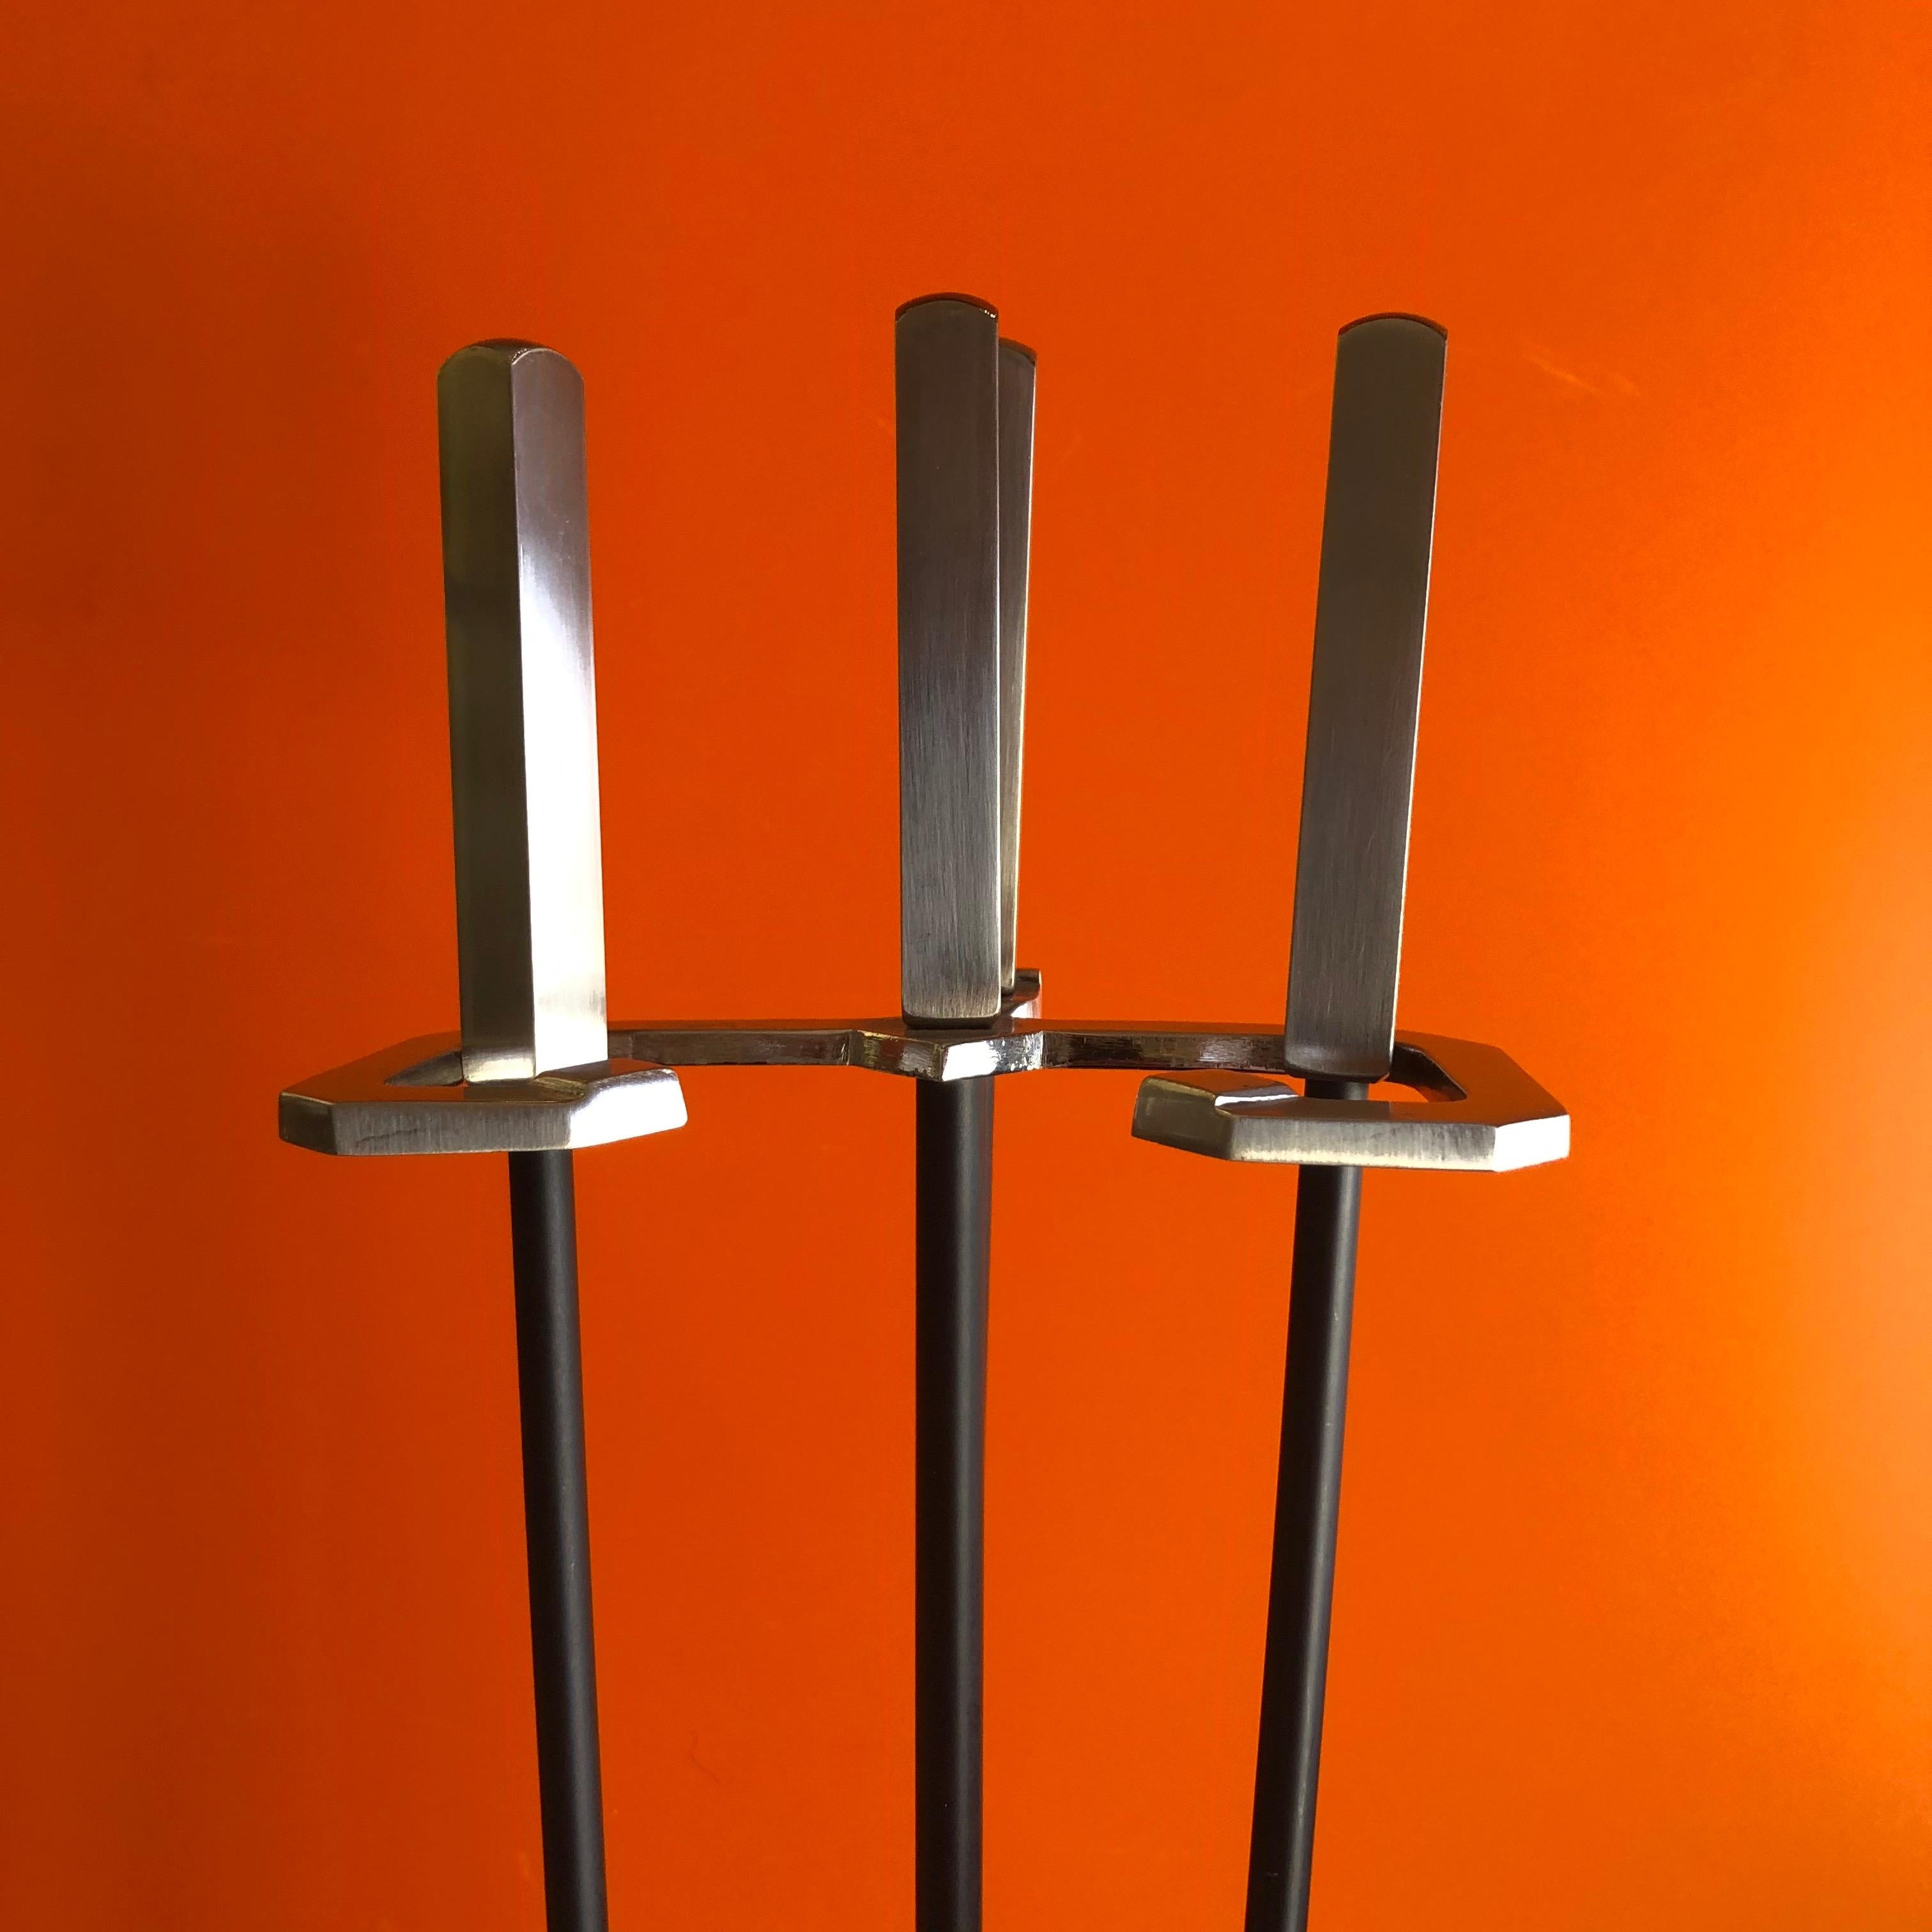 American Modernist Set of Fire Place Tools with Stainless Steel Handles